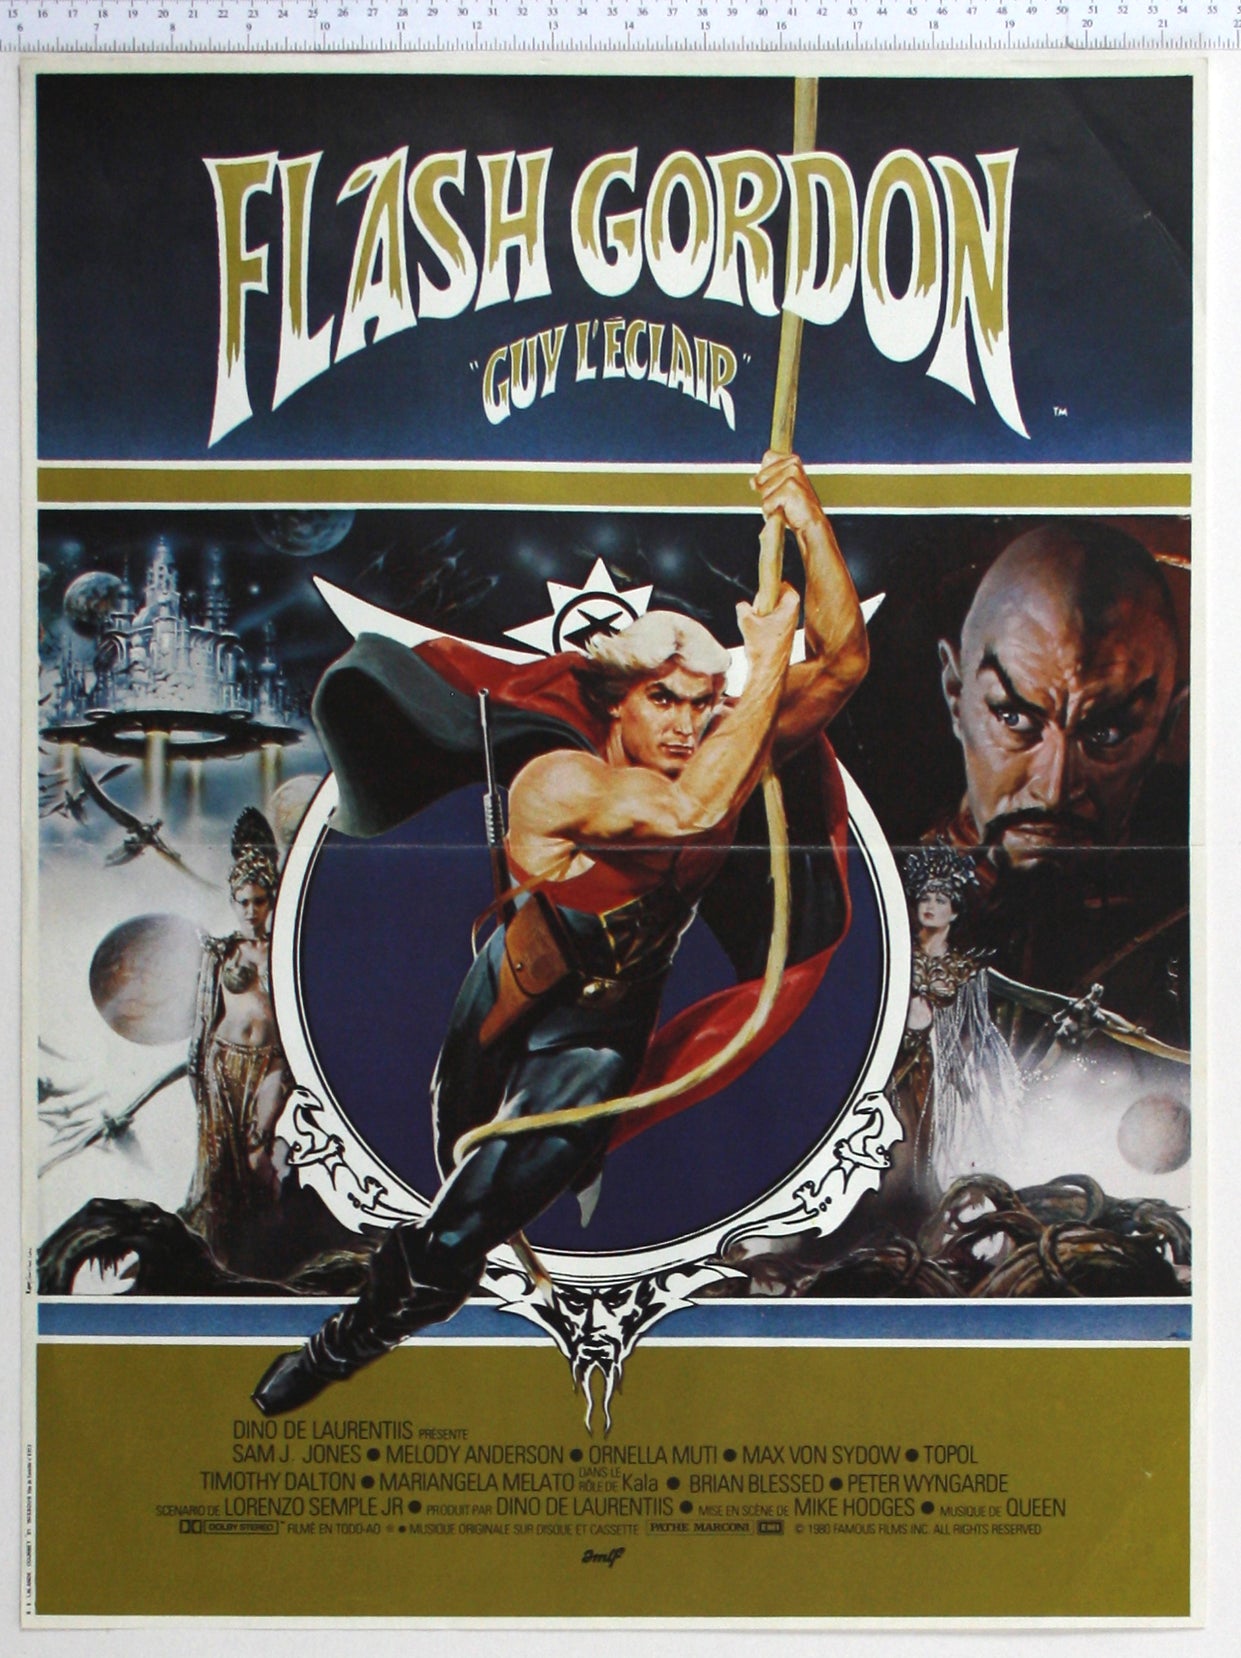 Flash Gordon swinging from vine, surrounding are floating city, evil princess, Dale Arden with Ming watching.